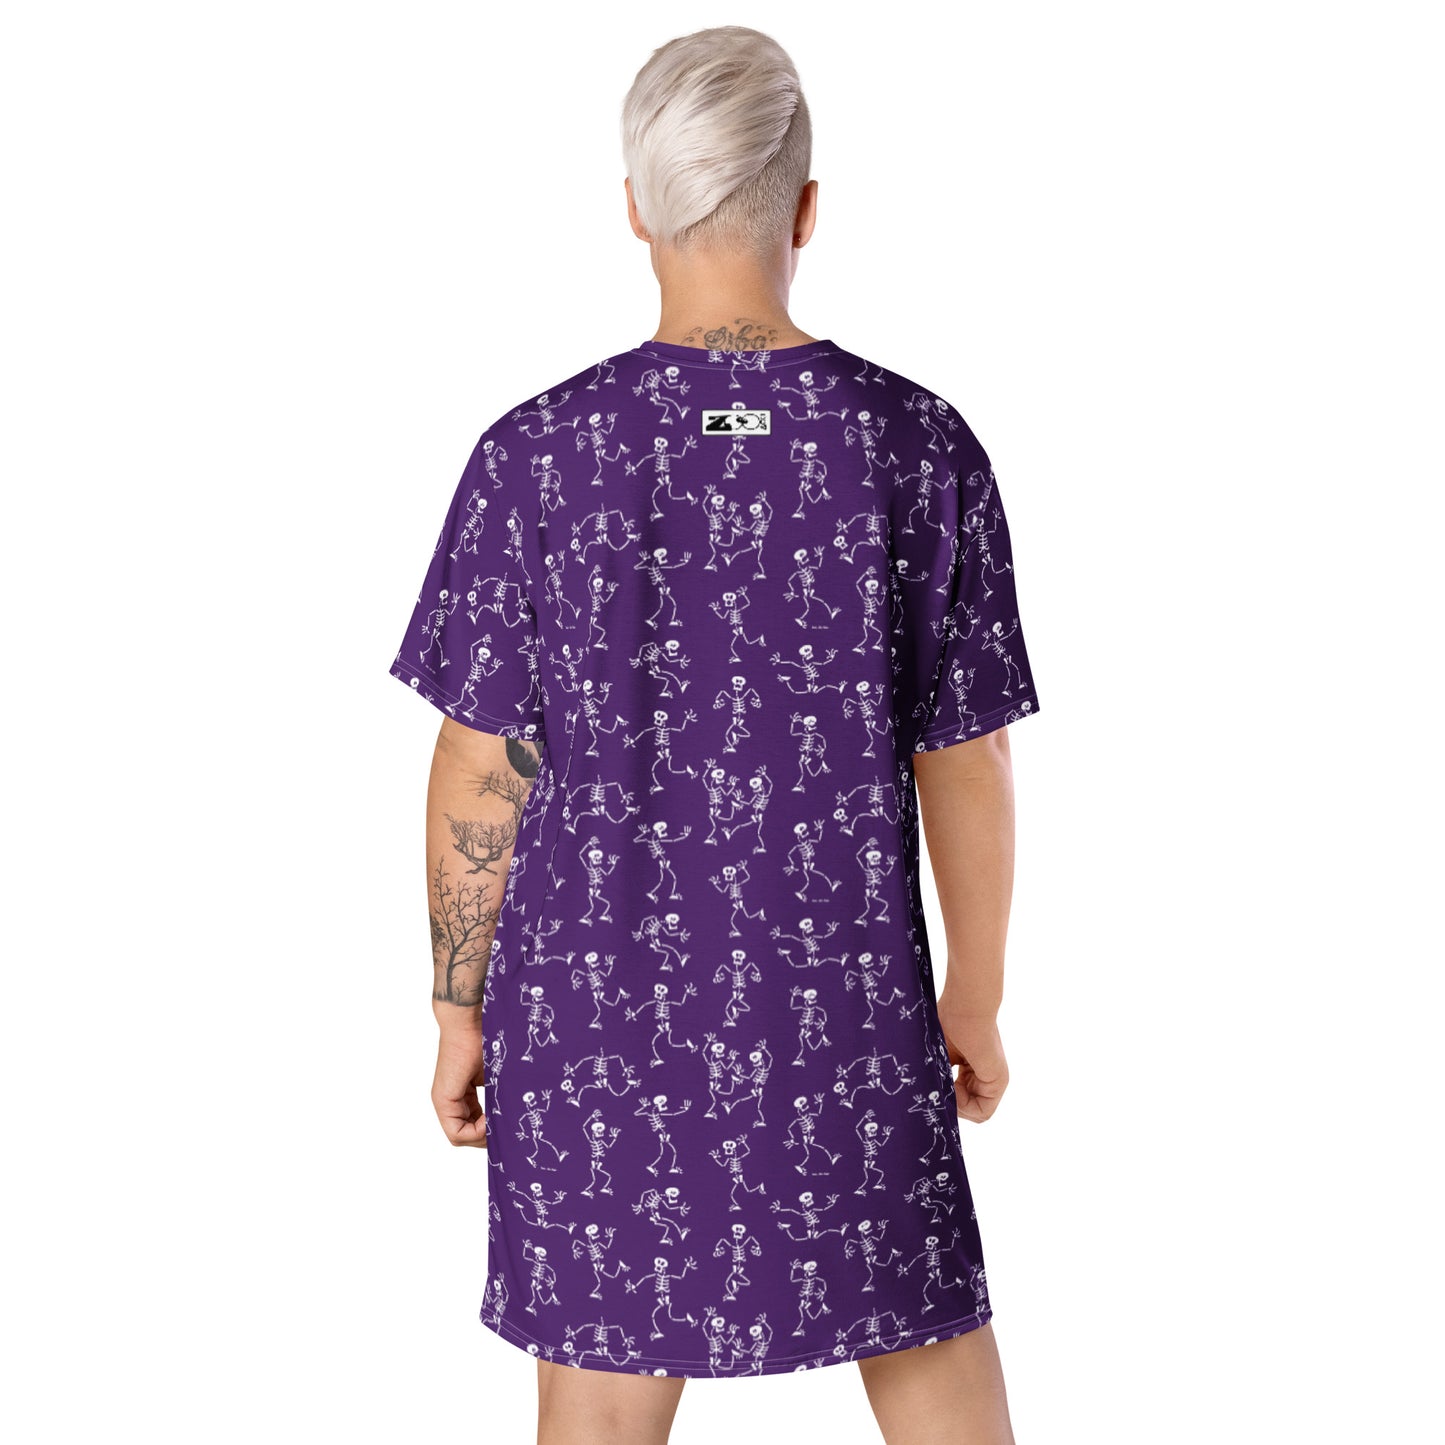 Fantastic skeletons having a great time on Halloween T-shirt dress. Back view